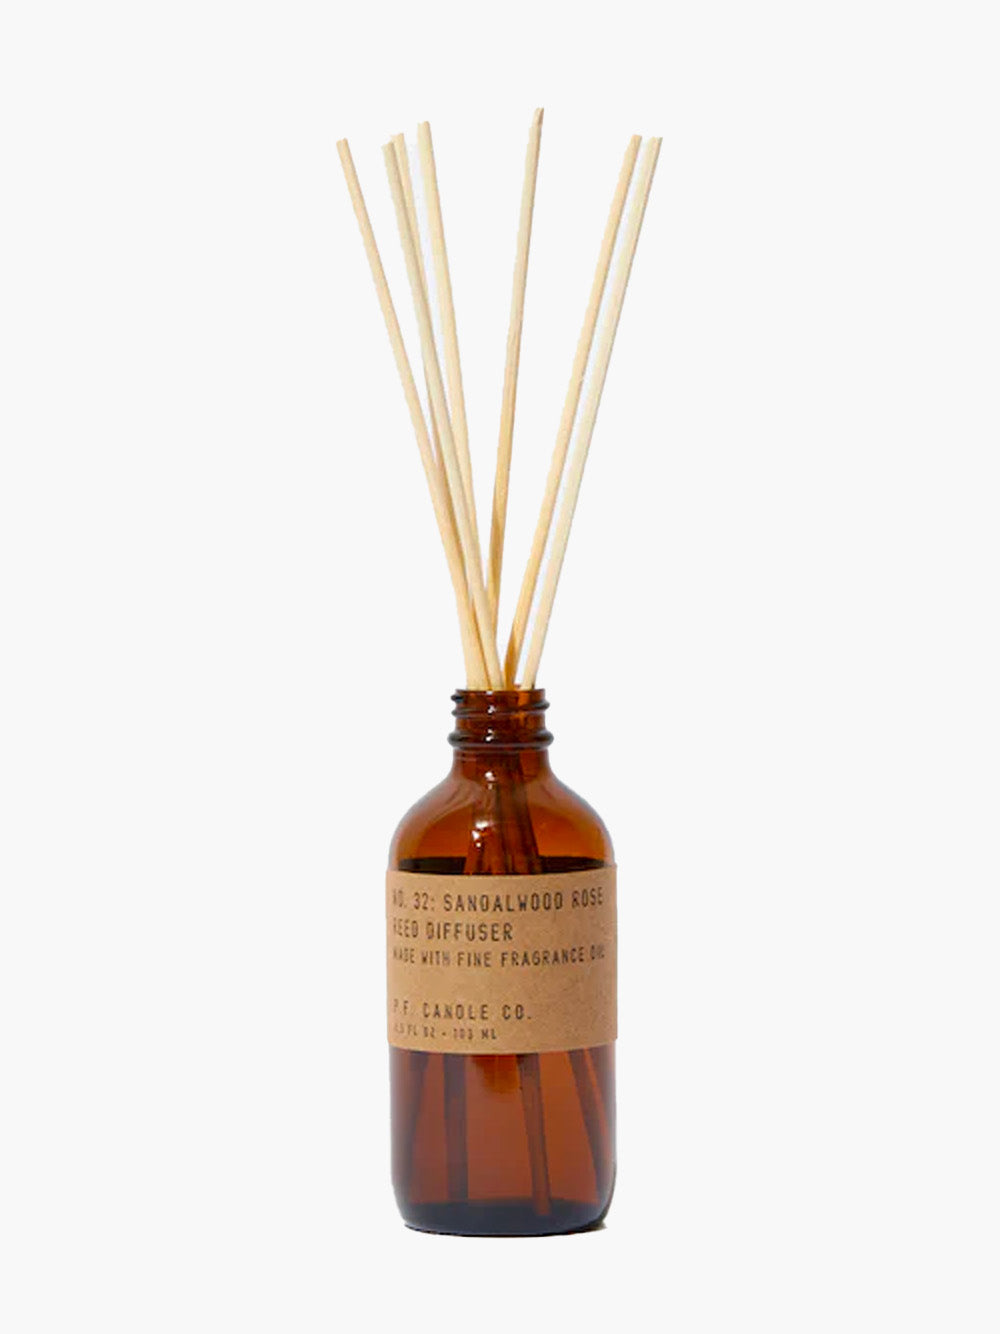 P.F. Candle Co. Reed Diffuser (100ml) - No.32 Sandalwood Rose